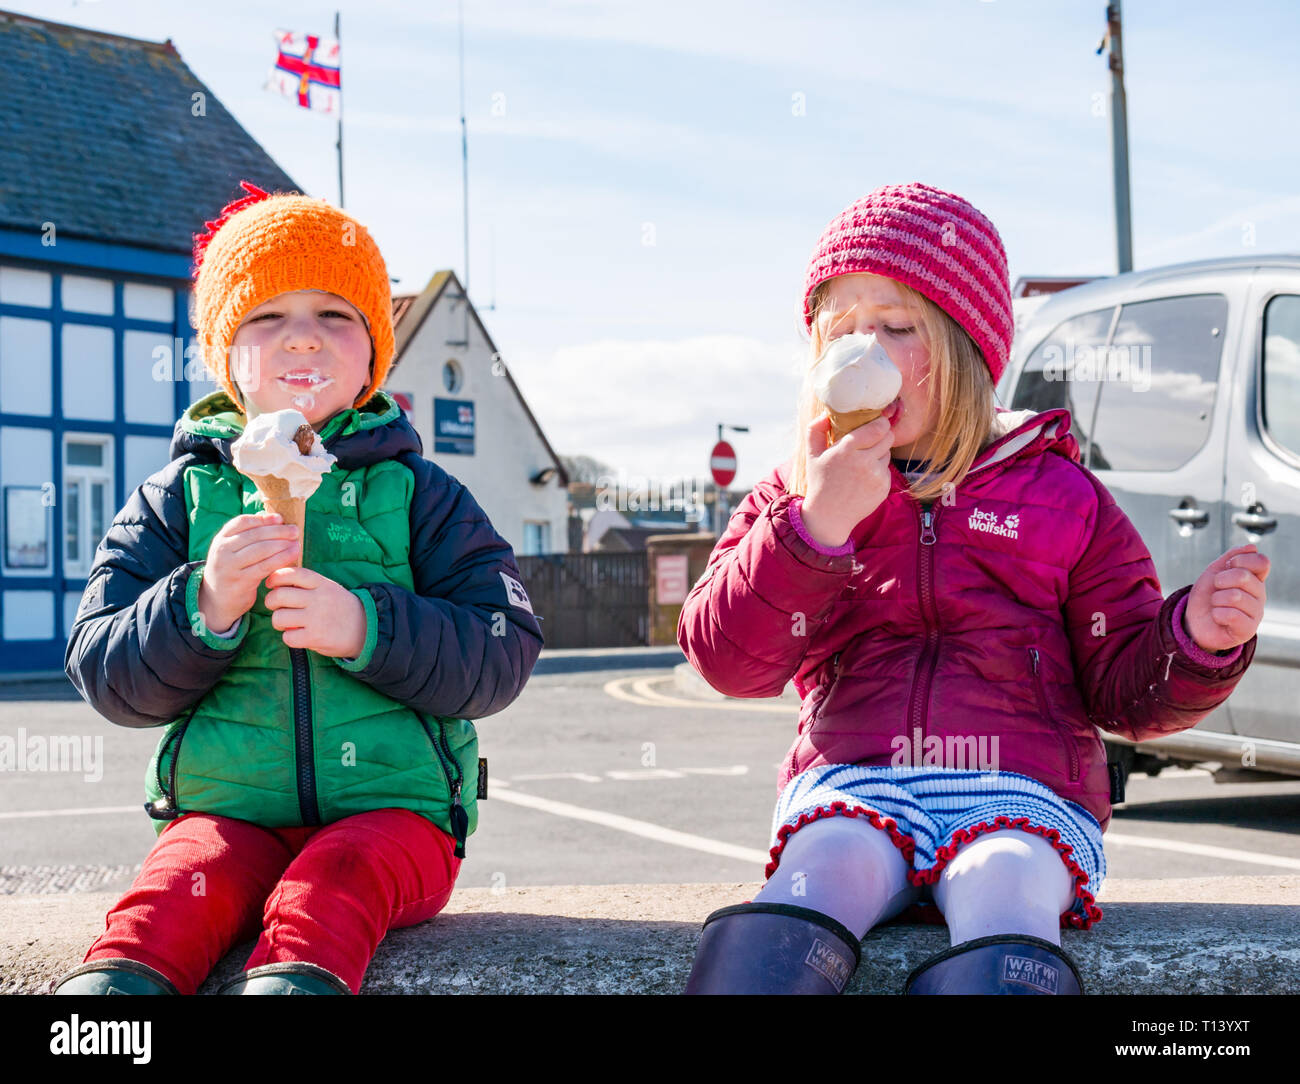 North Berwick, East Lothian, Scotland, UK, 23rd March 2019. UK Weather: Spring weather and sunshine at the seaside town. Two young children, Poppy and Ollie, enjoy a Luca ice cream despite the cool weather Stock Photo